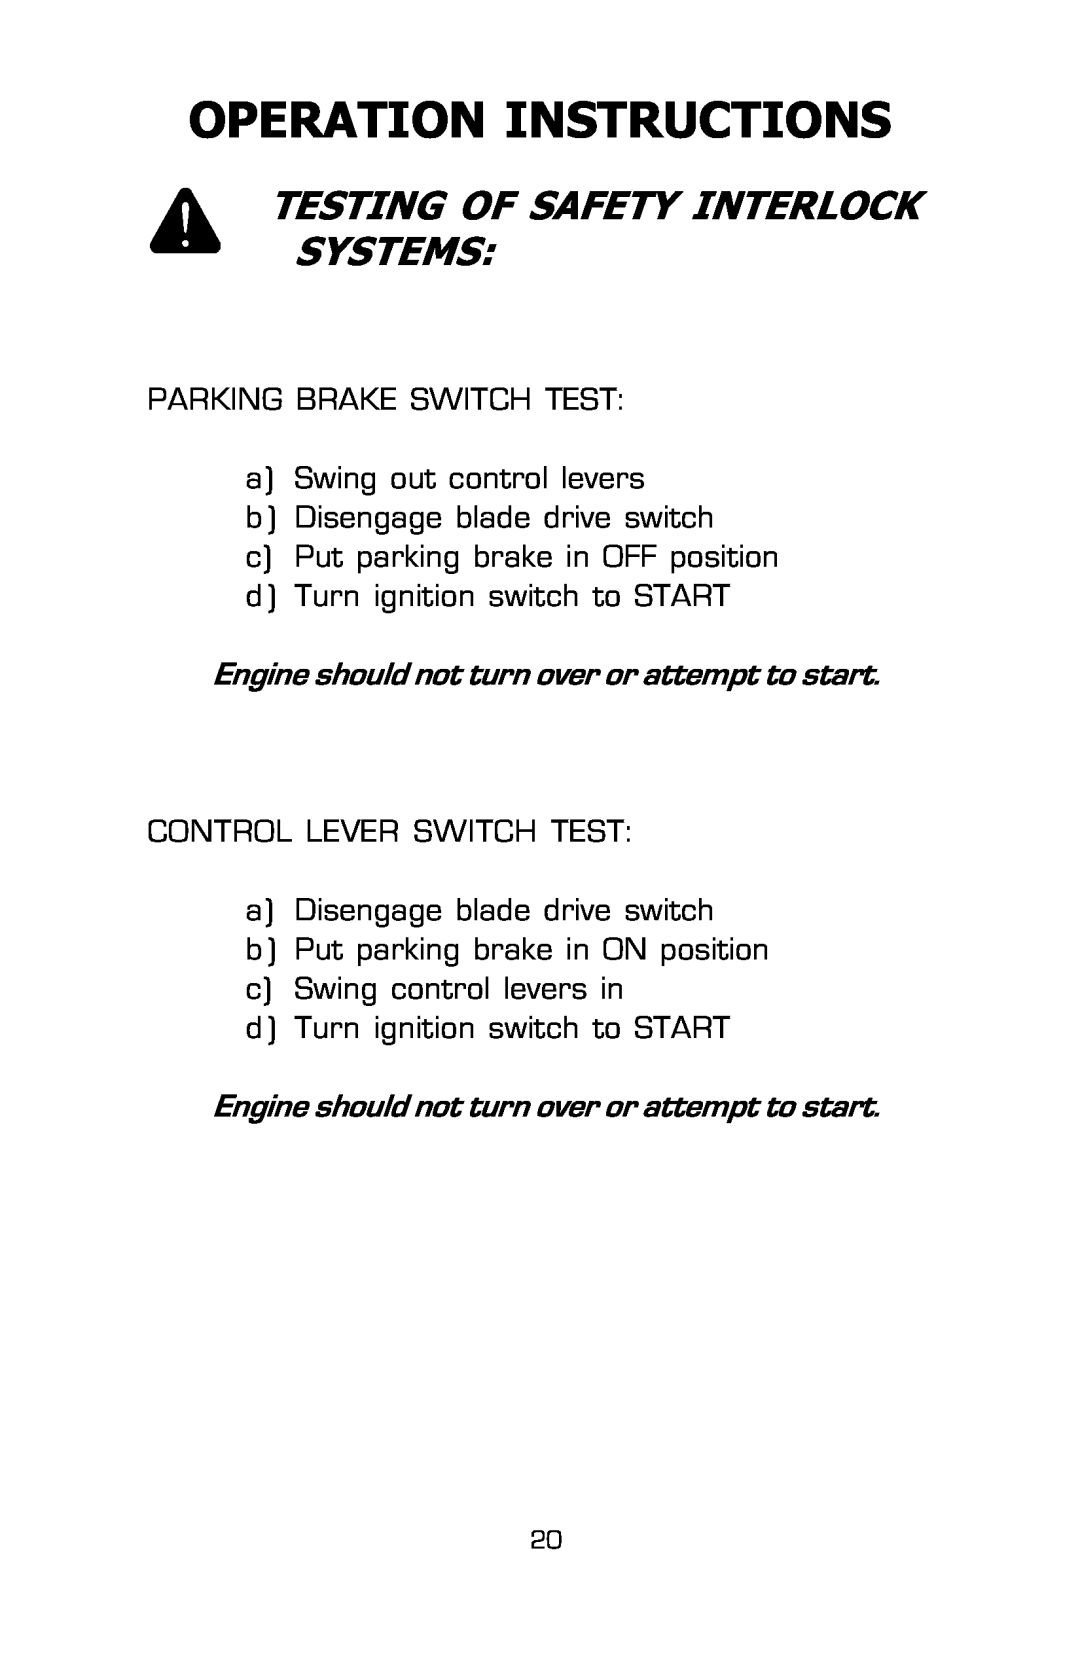 Dixon 16134-0803 manual Operation Instructions, Testing Of Safety Interlock Systems 